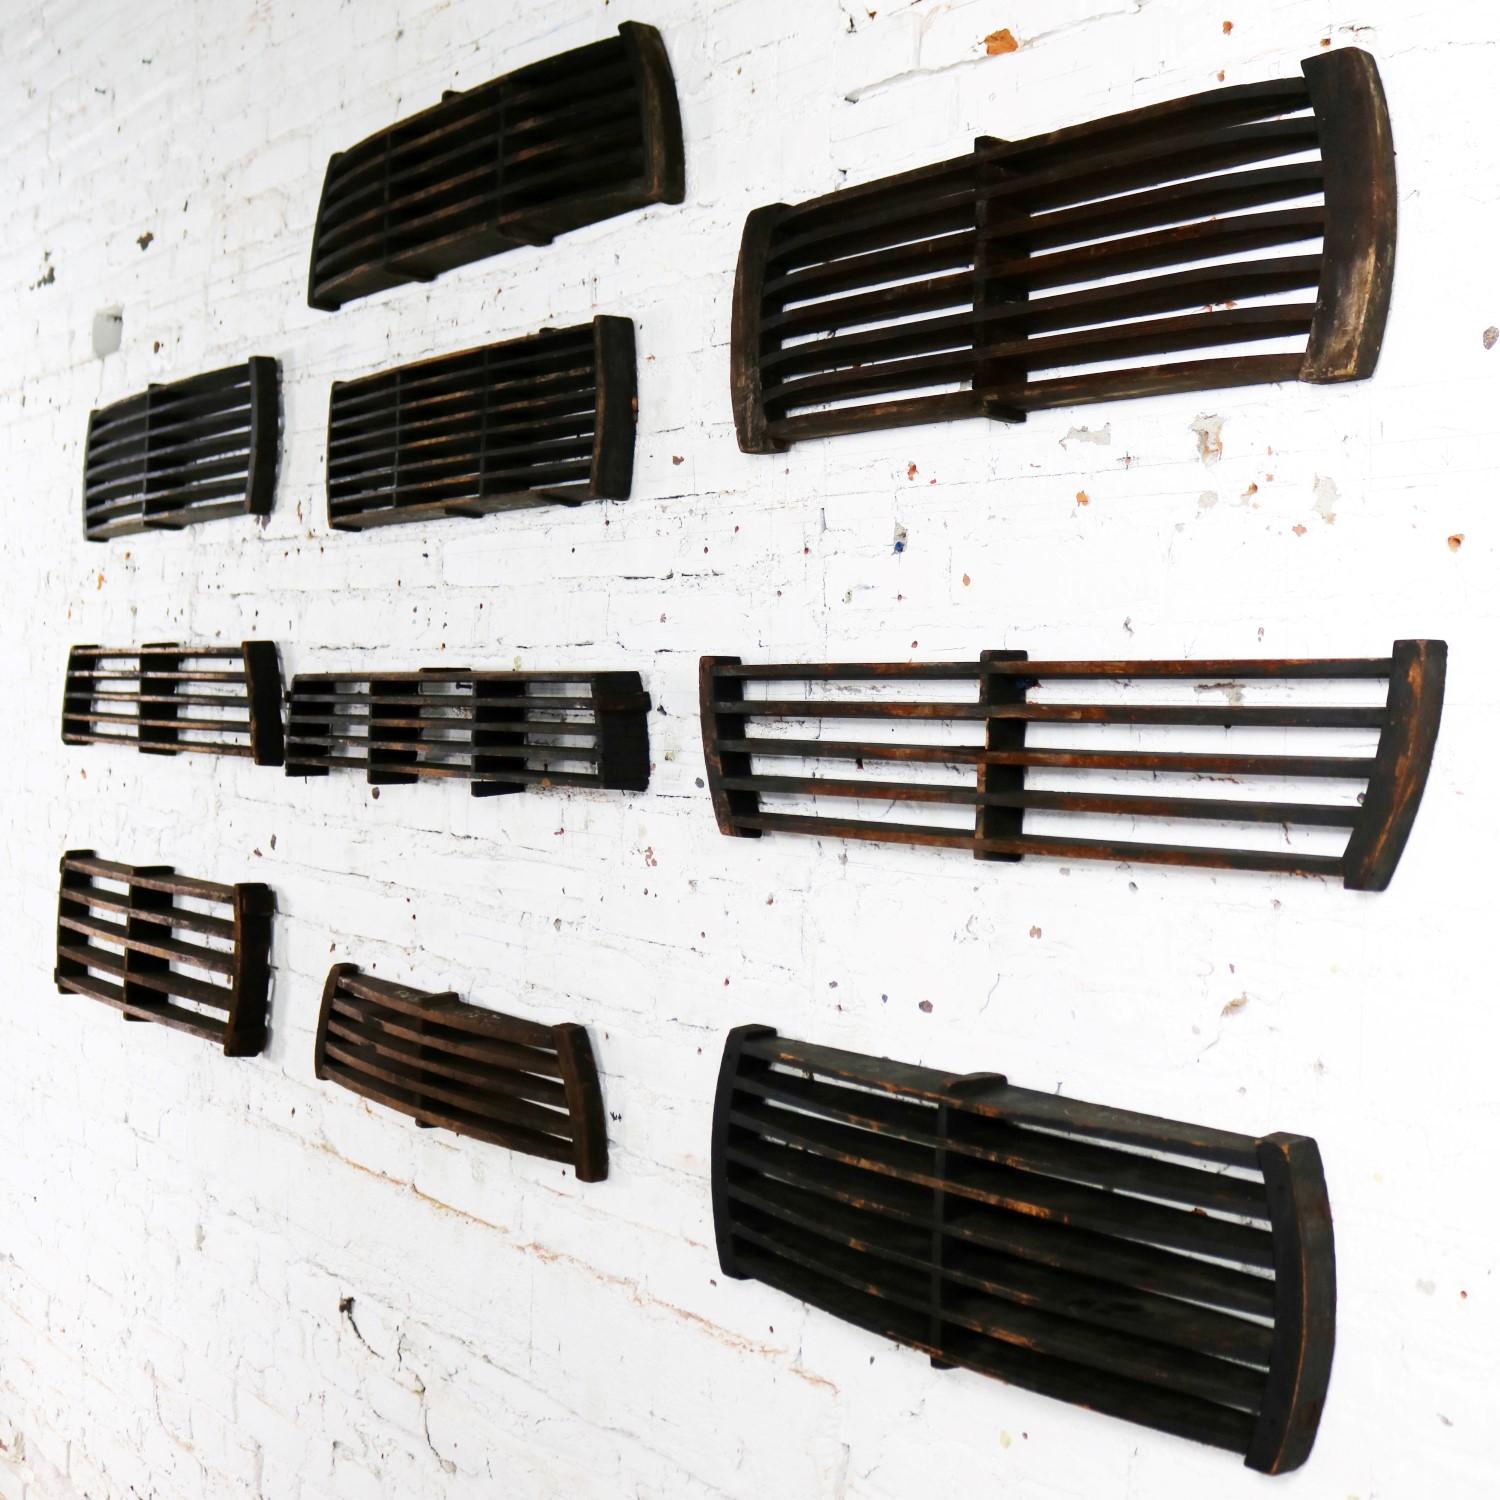 Antique Industrial Slatted Foundry Patterns Handmade Wood Wall Sculpture, Grp 4 For Sale 1